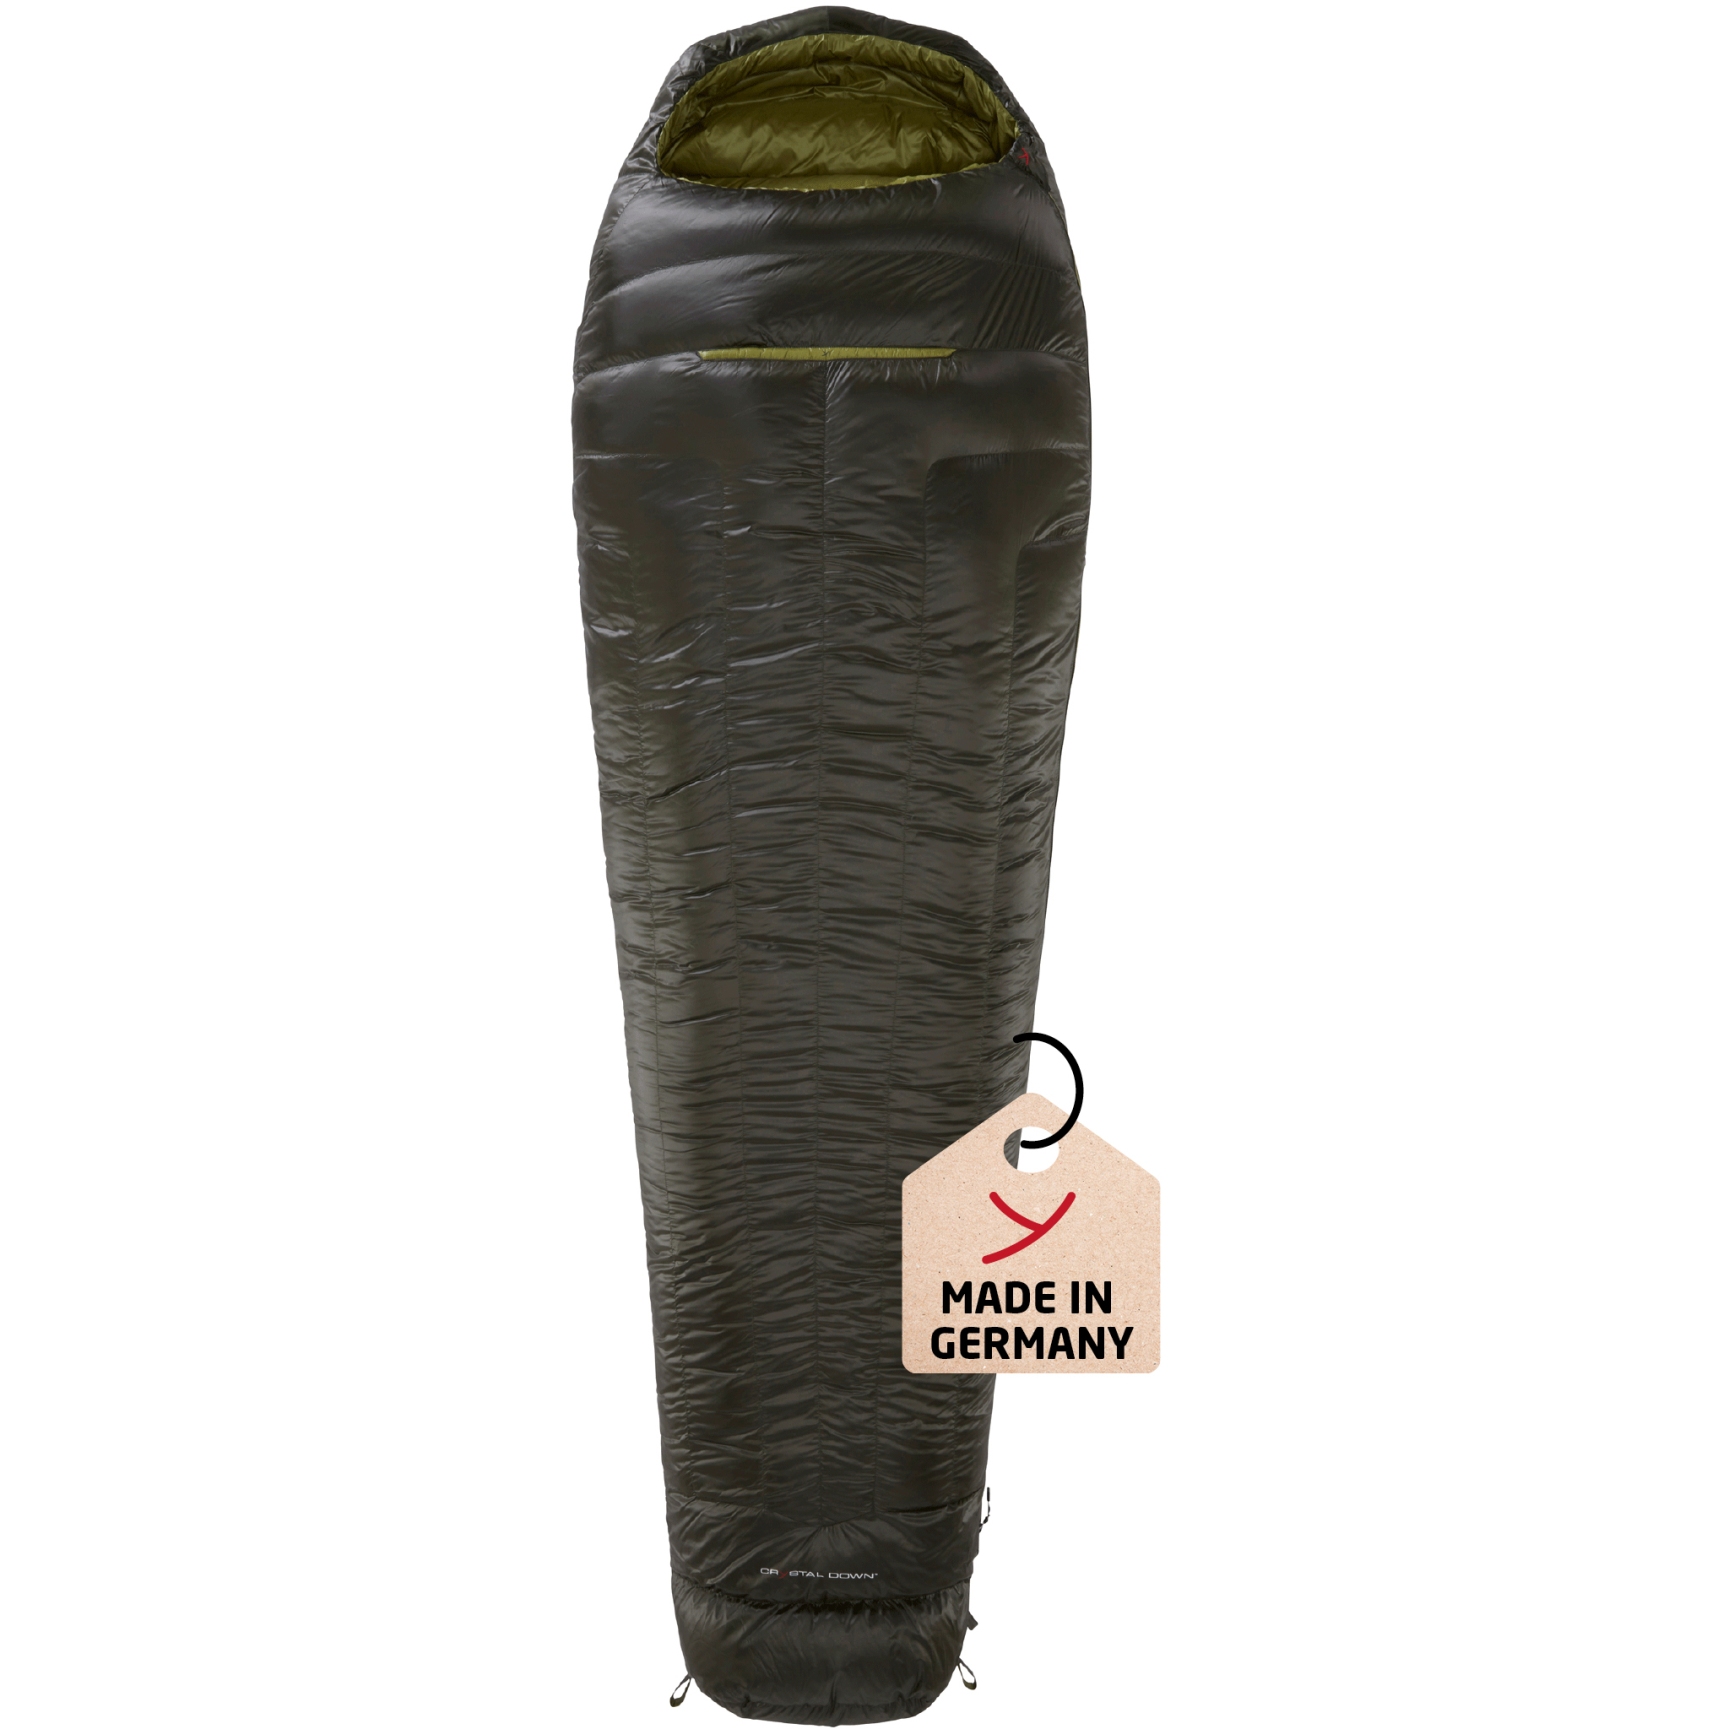 Picture of Y by Nordisk Balance 400 L Sleeping Bag - forest night/green moss